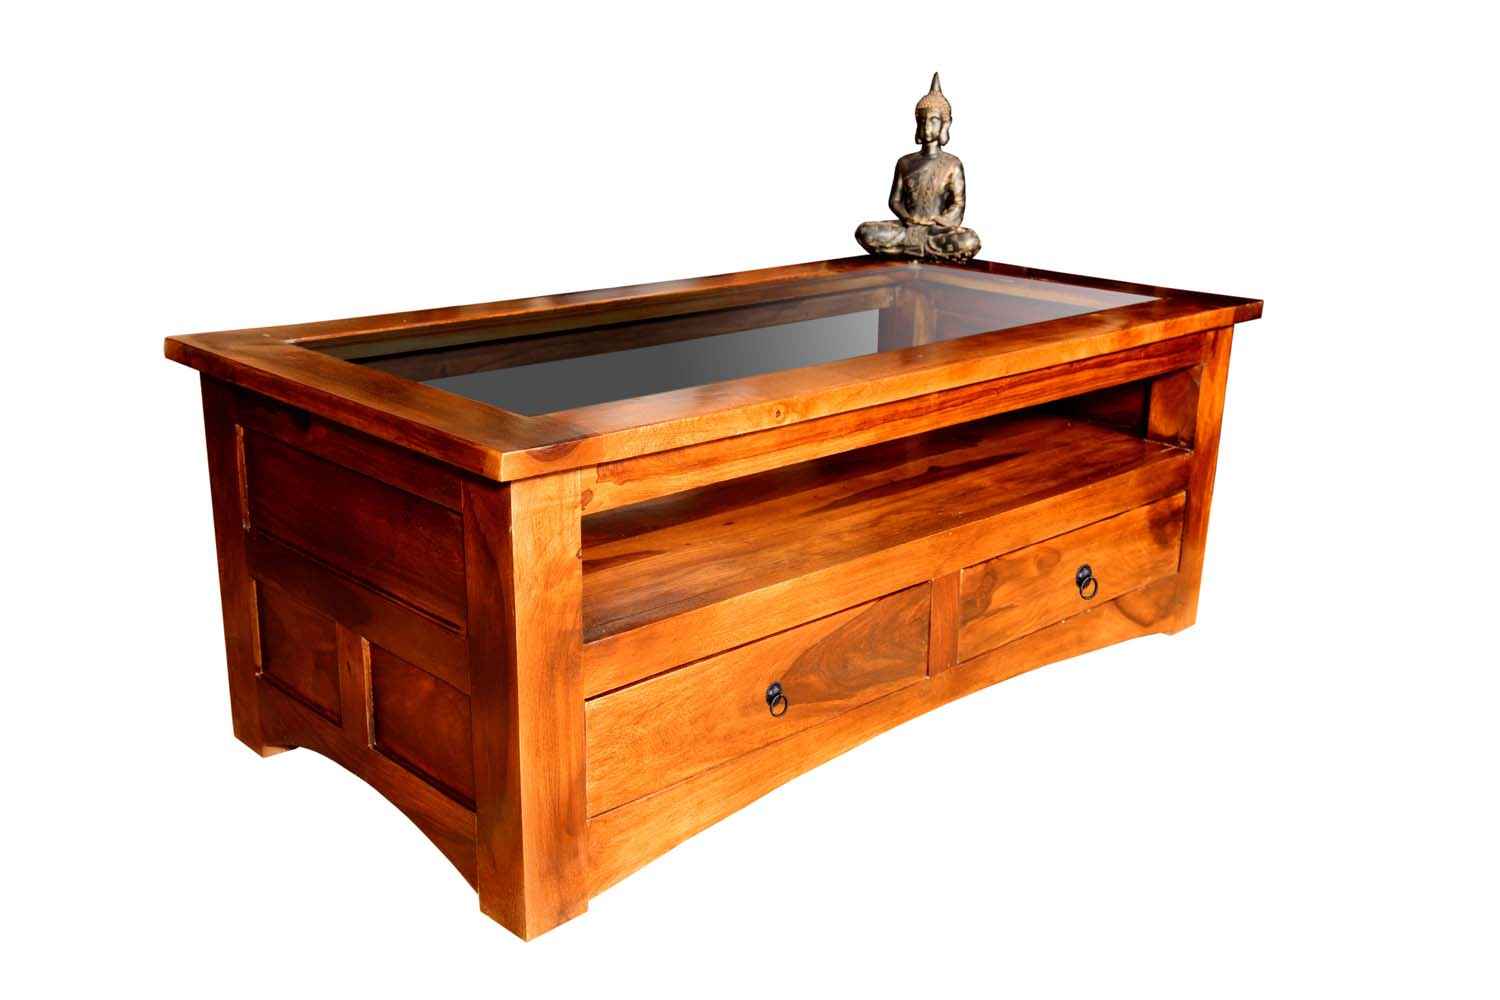 Buy Mint two drawwer L teak finish coffee table | Living ...